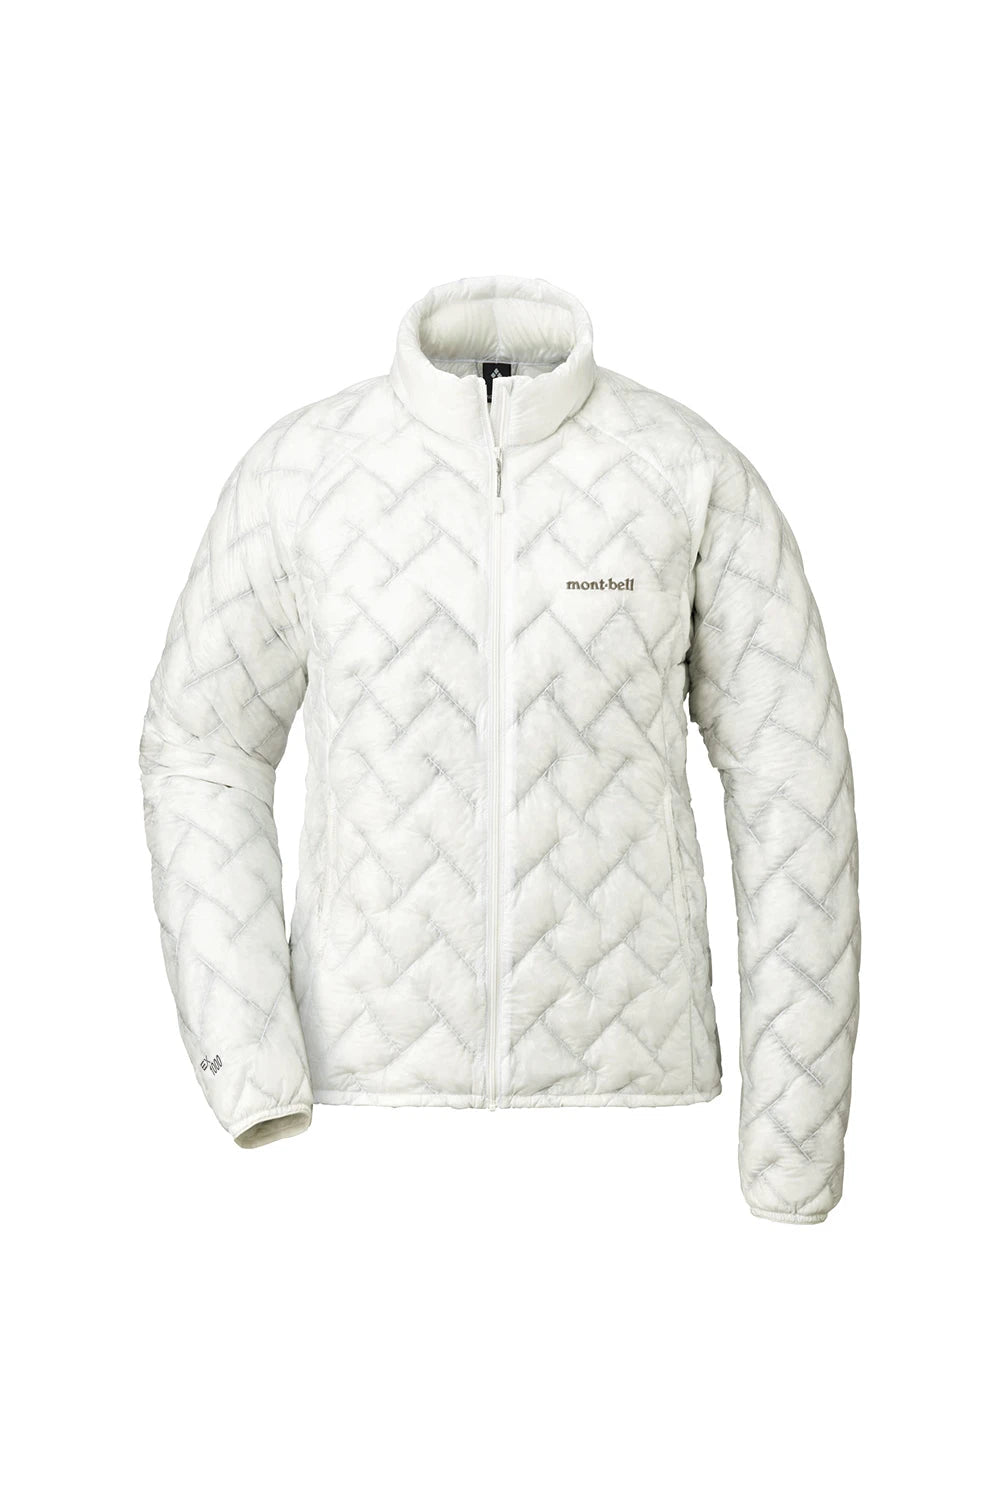 Montbell Womens Plasma 1000 Down Jacket - White | Coffee Outdoors